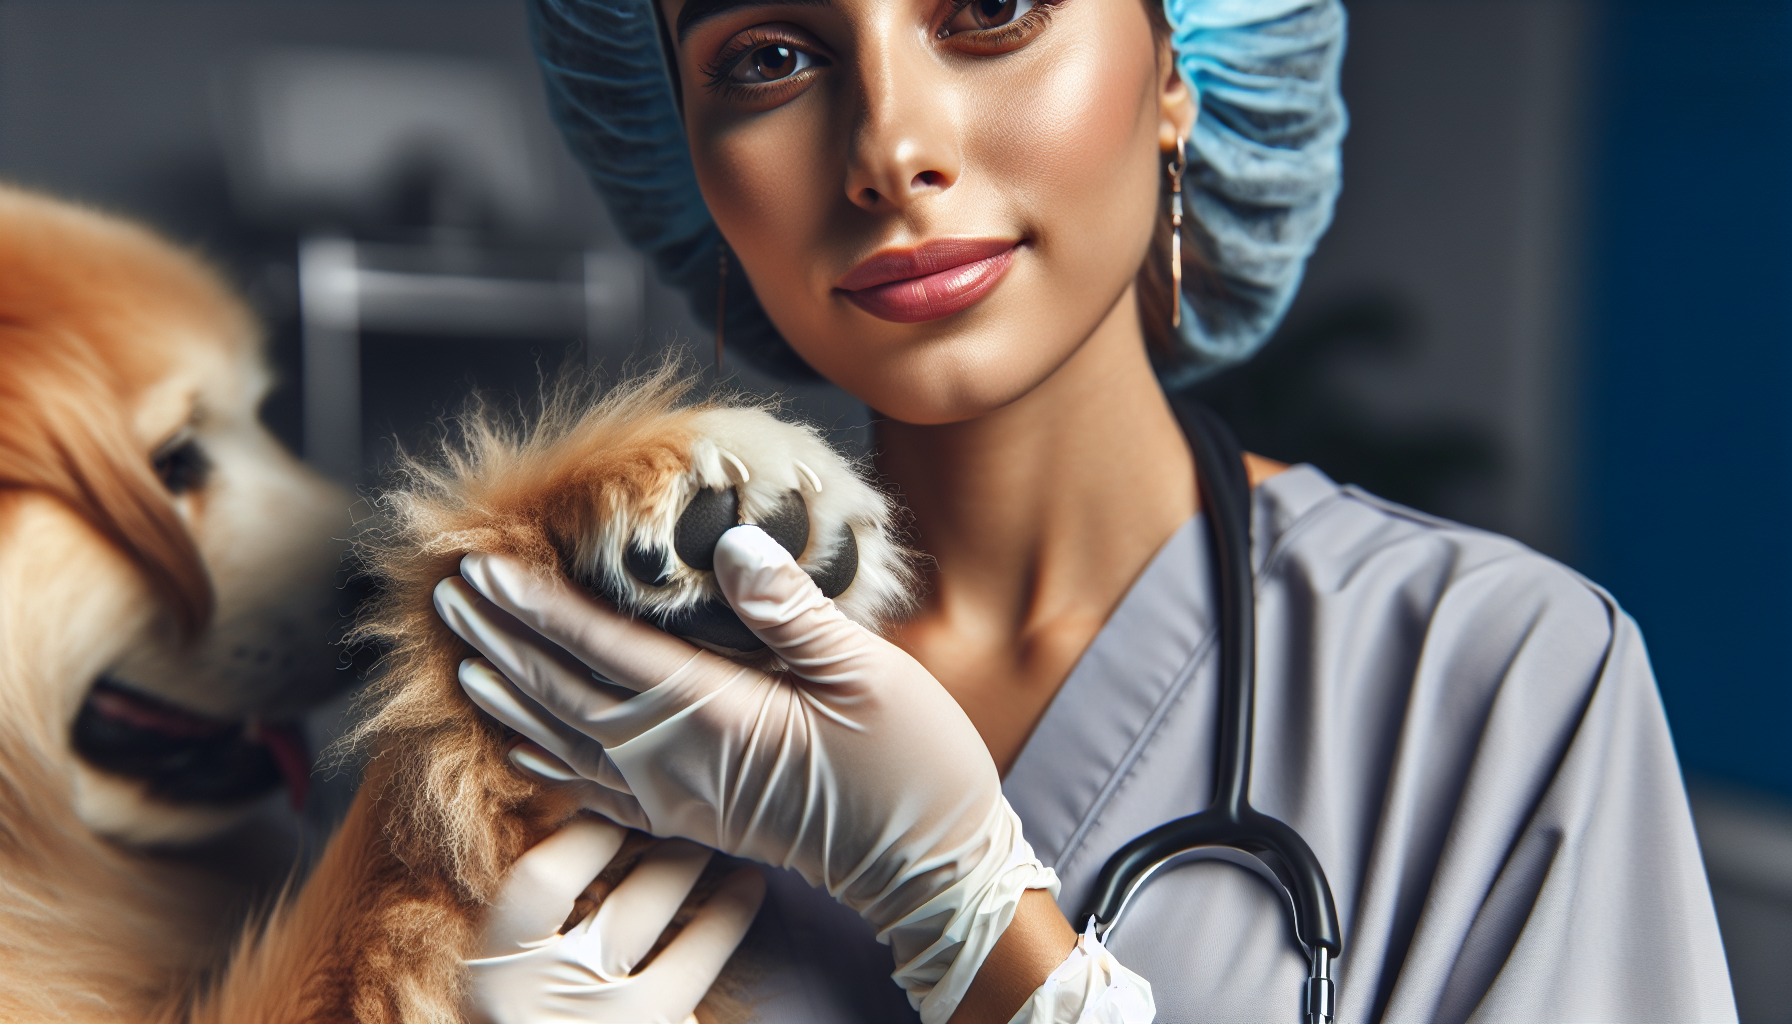 Emergency Veterinary Care: Ensuring the Safety of Your Beloved Pet